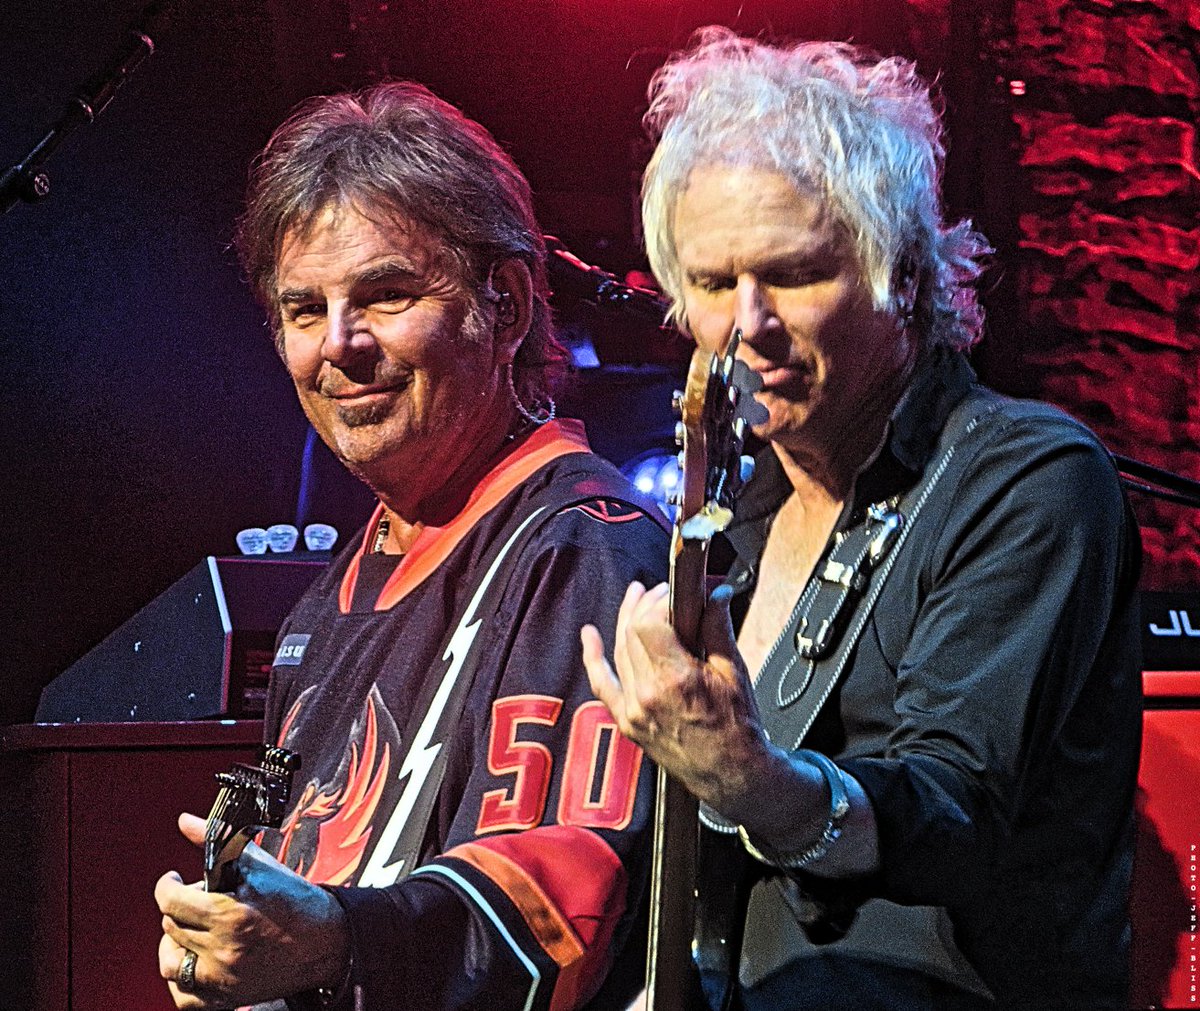 Jonathan Cain (left) and Todd Jensen of Journey - Acrisure Arena; Thousand Palms, CA (4-25-23). @JourneyOfficial @TheJonathanCain #ToddJensen
Photo: Jeff Bliss 
jeffcbliss.tumblr.com